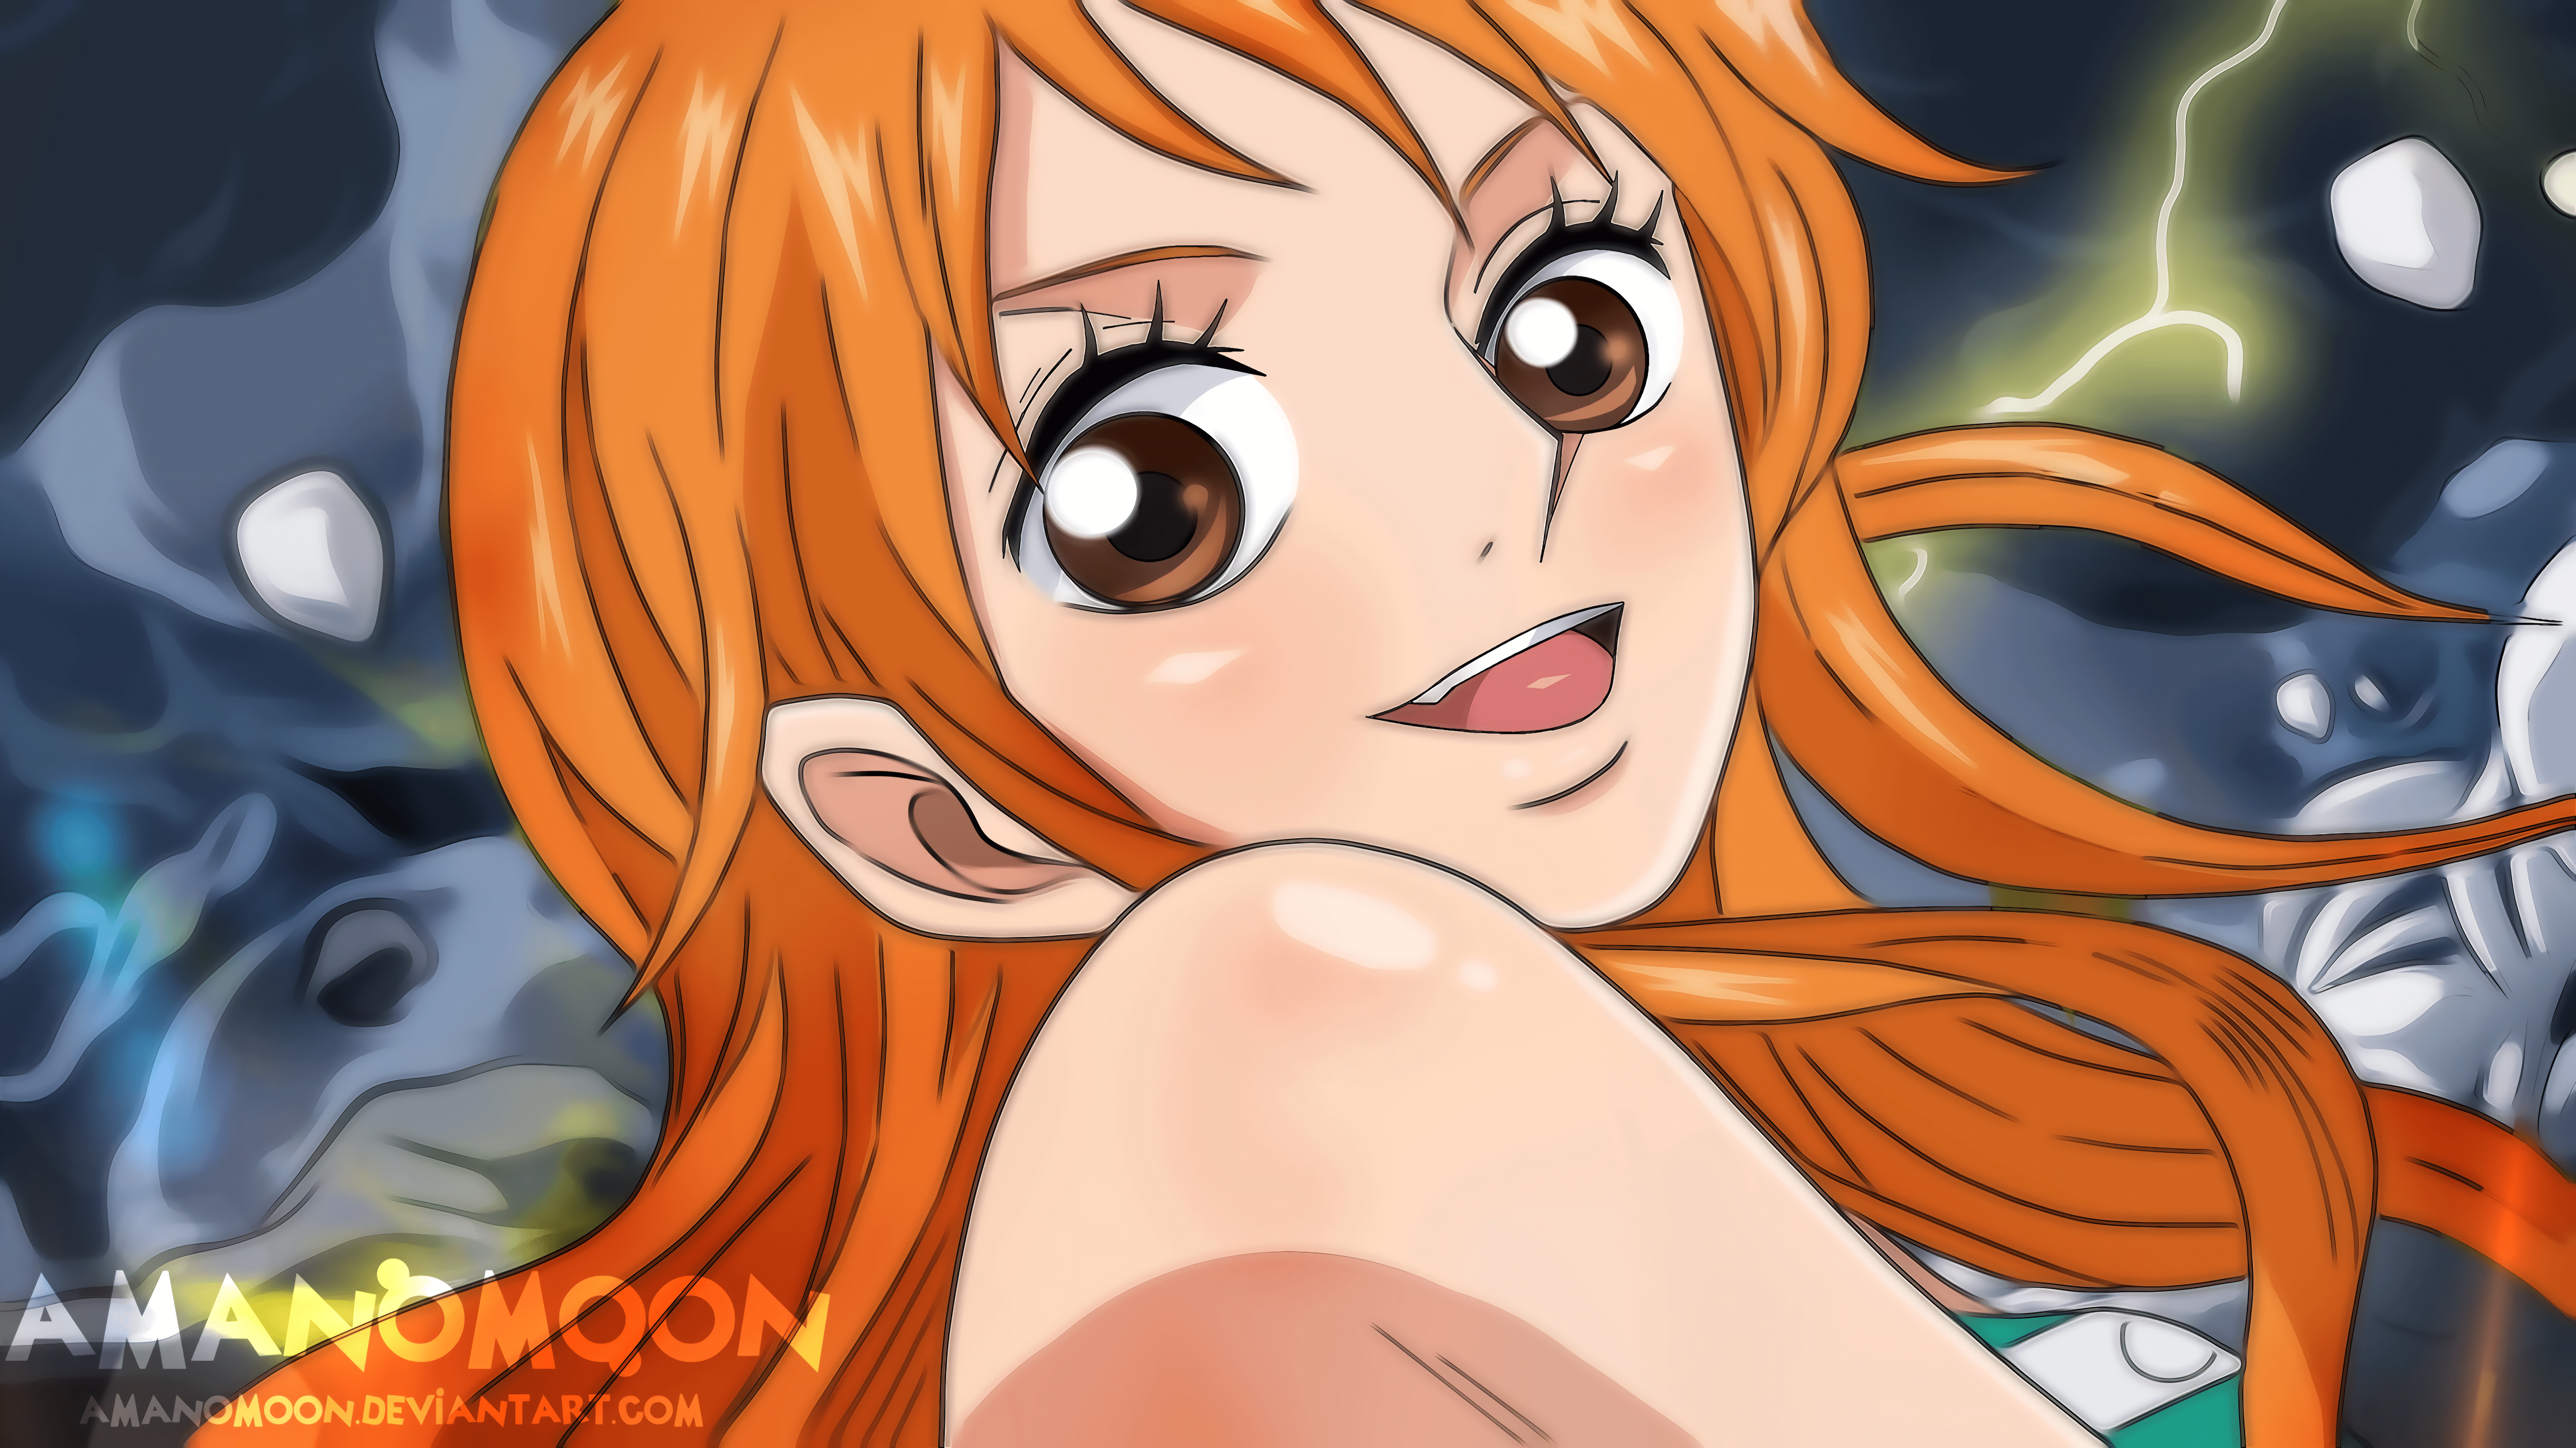 Nami One Piece Wallpapers Top Free Nami One Piece Backgrounds